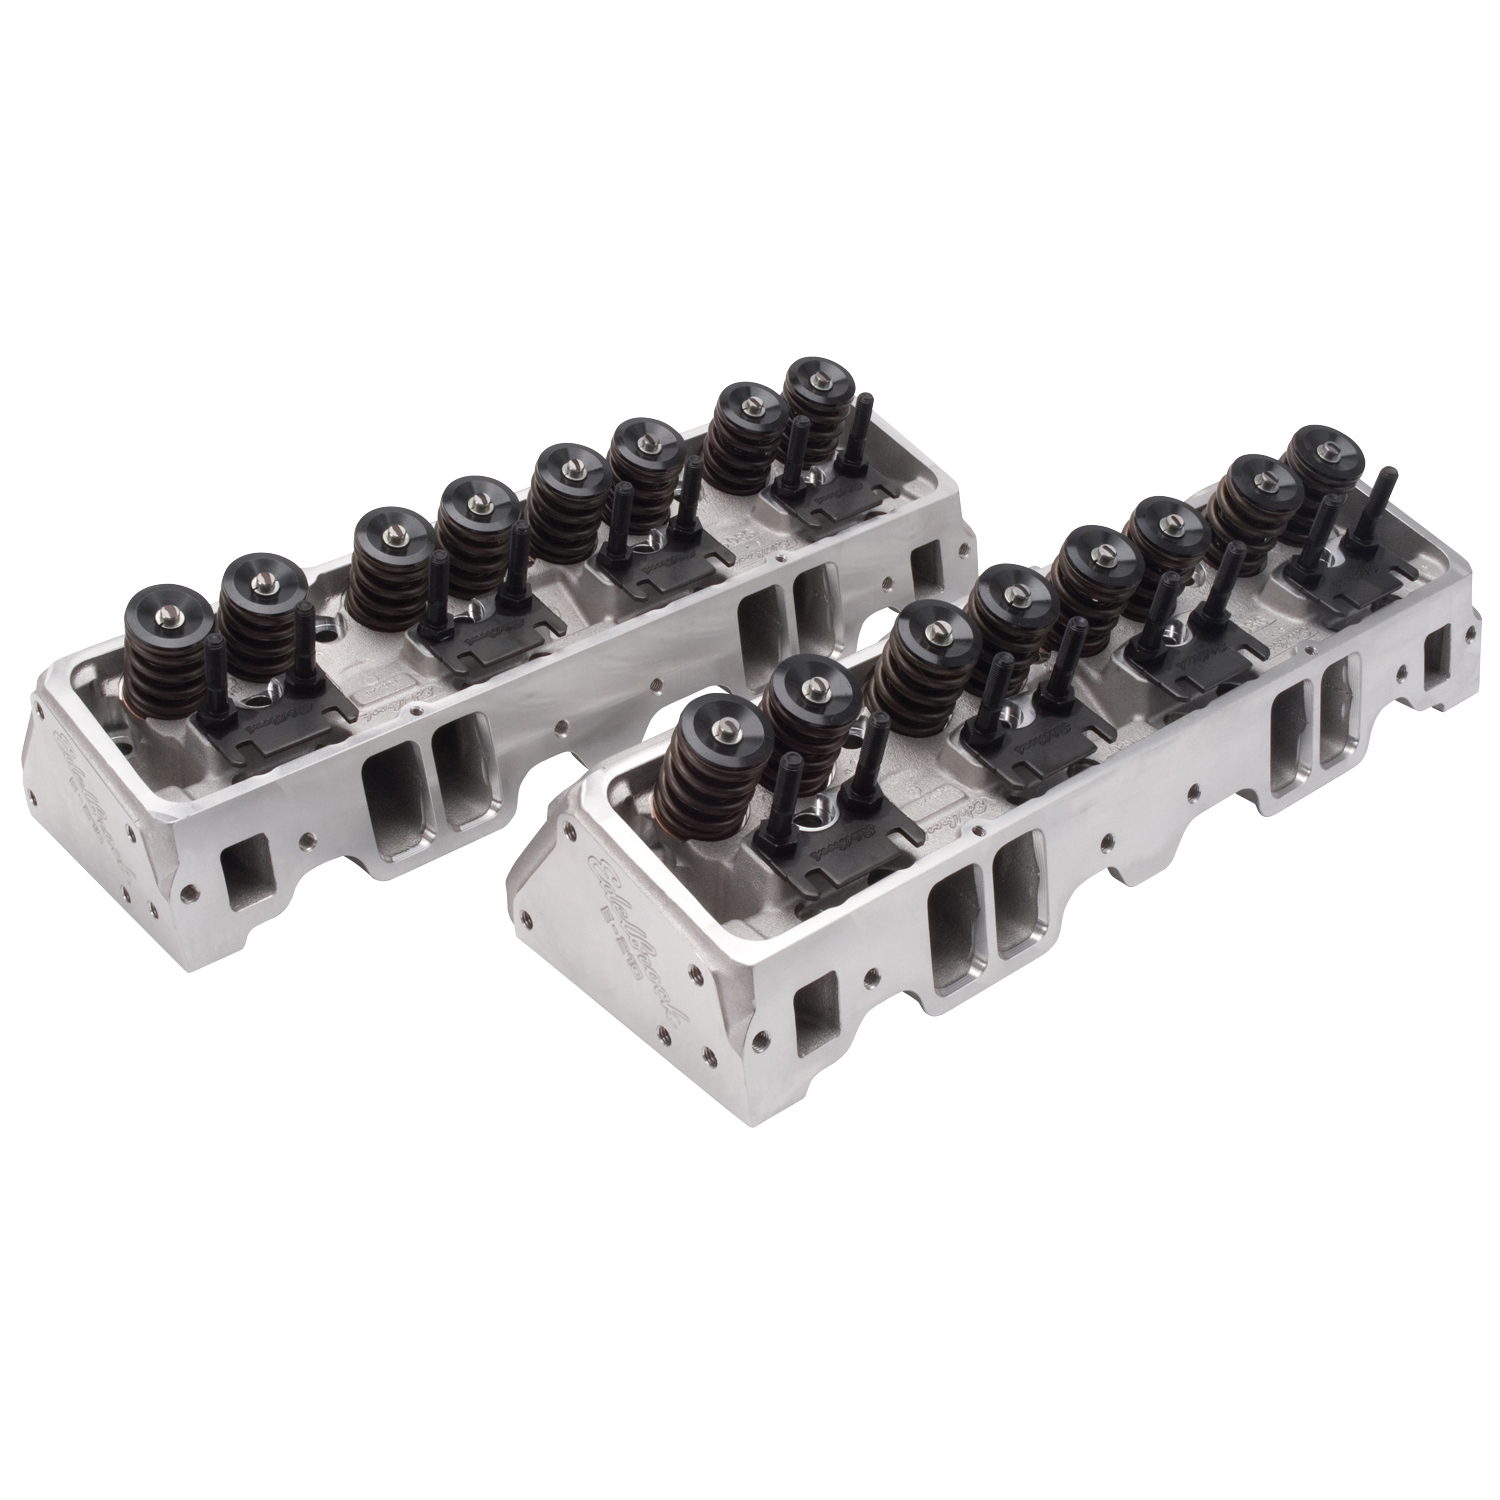 Small-Block Chevy E-Series Cylinder Head E-210 Flat Tappet Camshaft